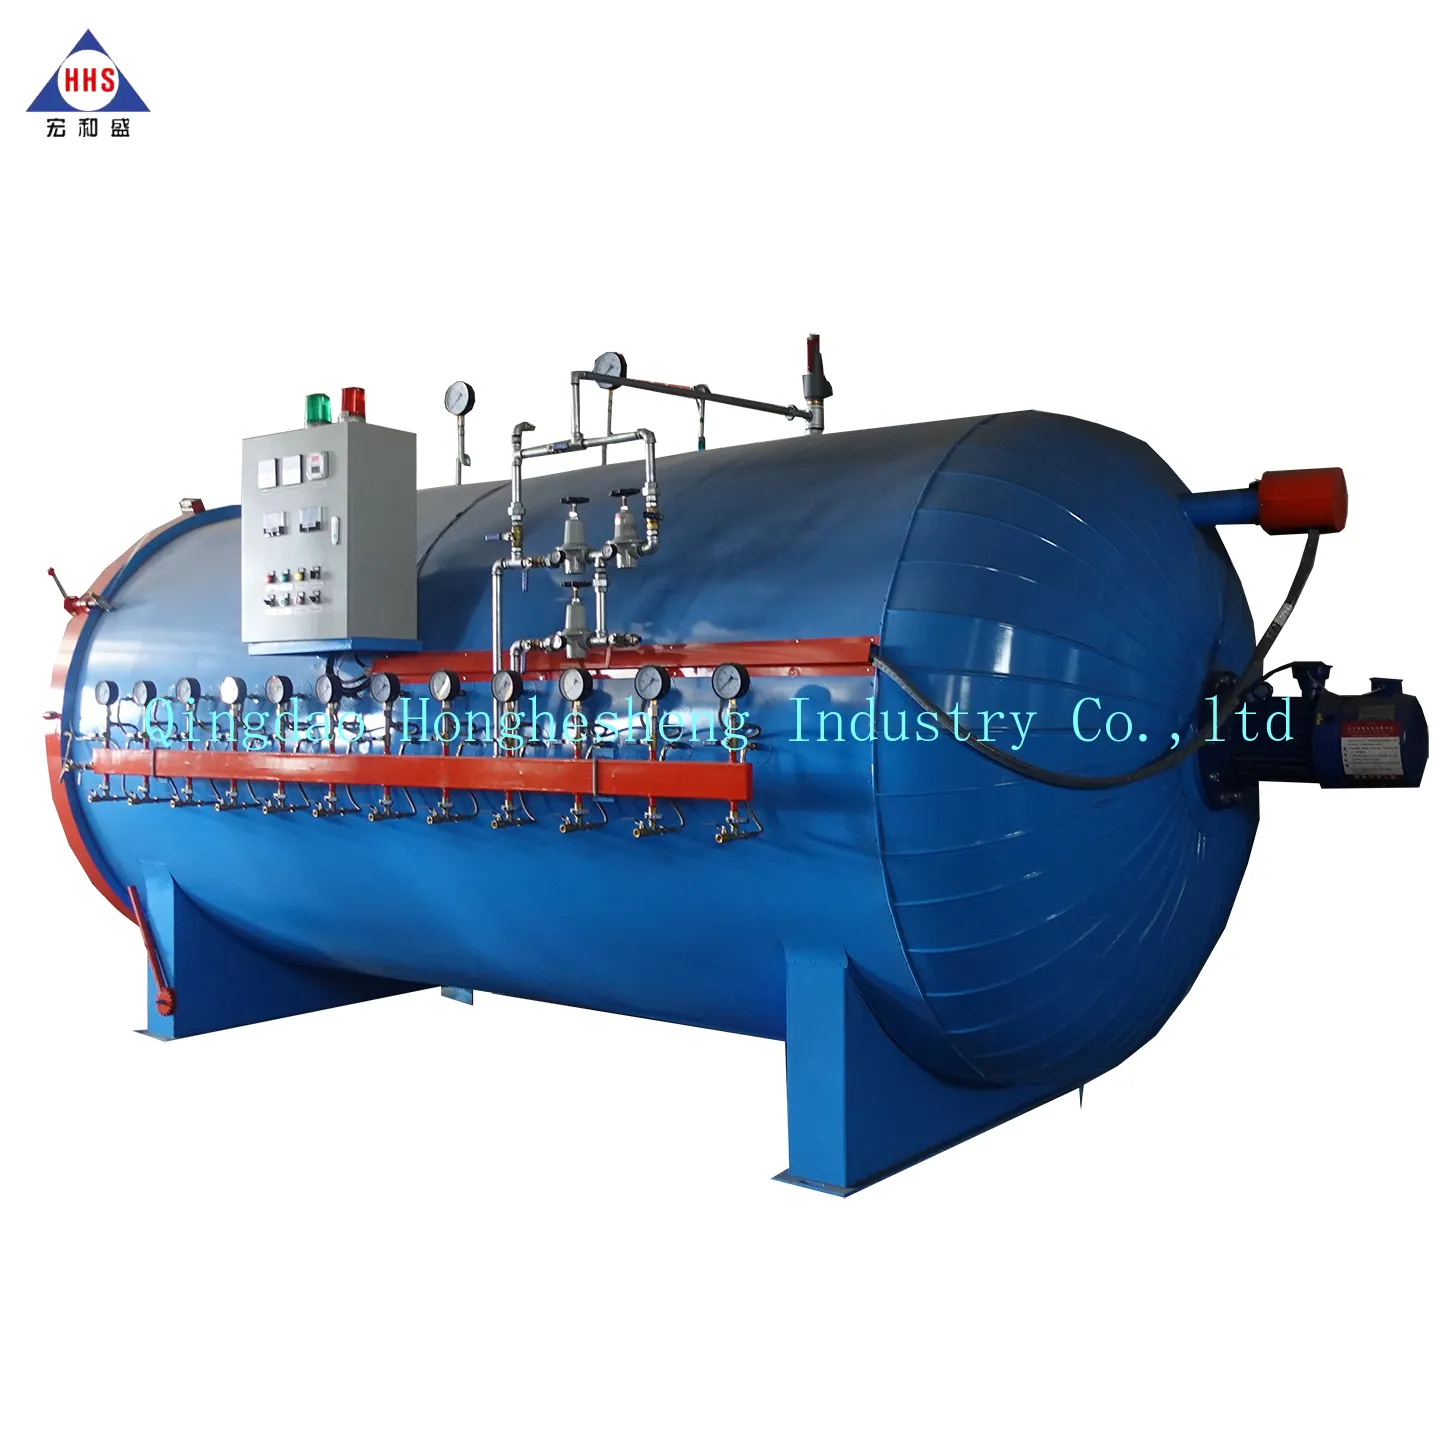 Rubber Vulcanization autoclave /Curing Autoclave For Tire Retread Processing industry